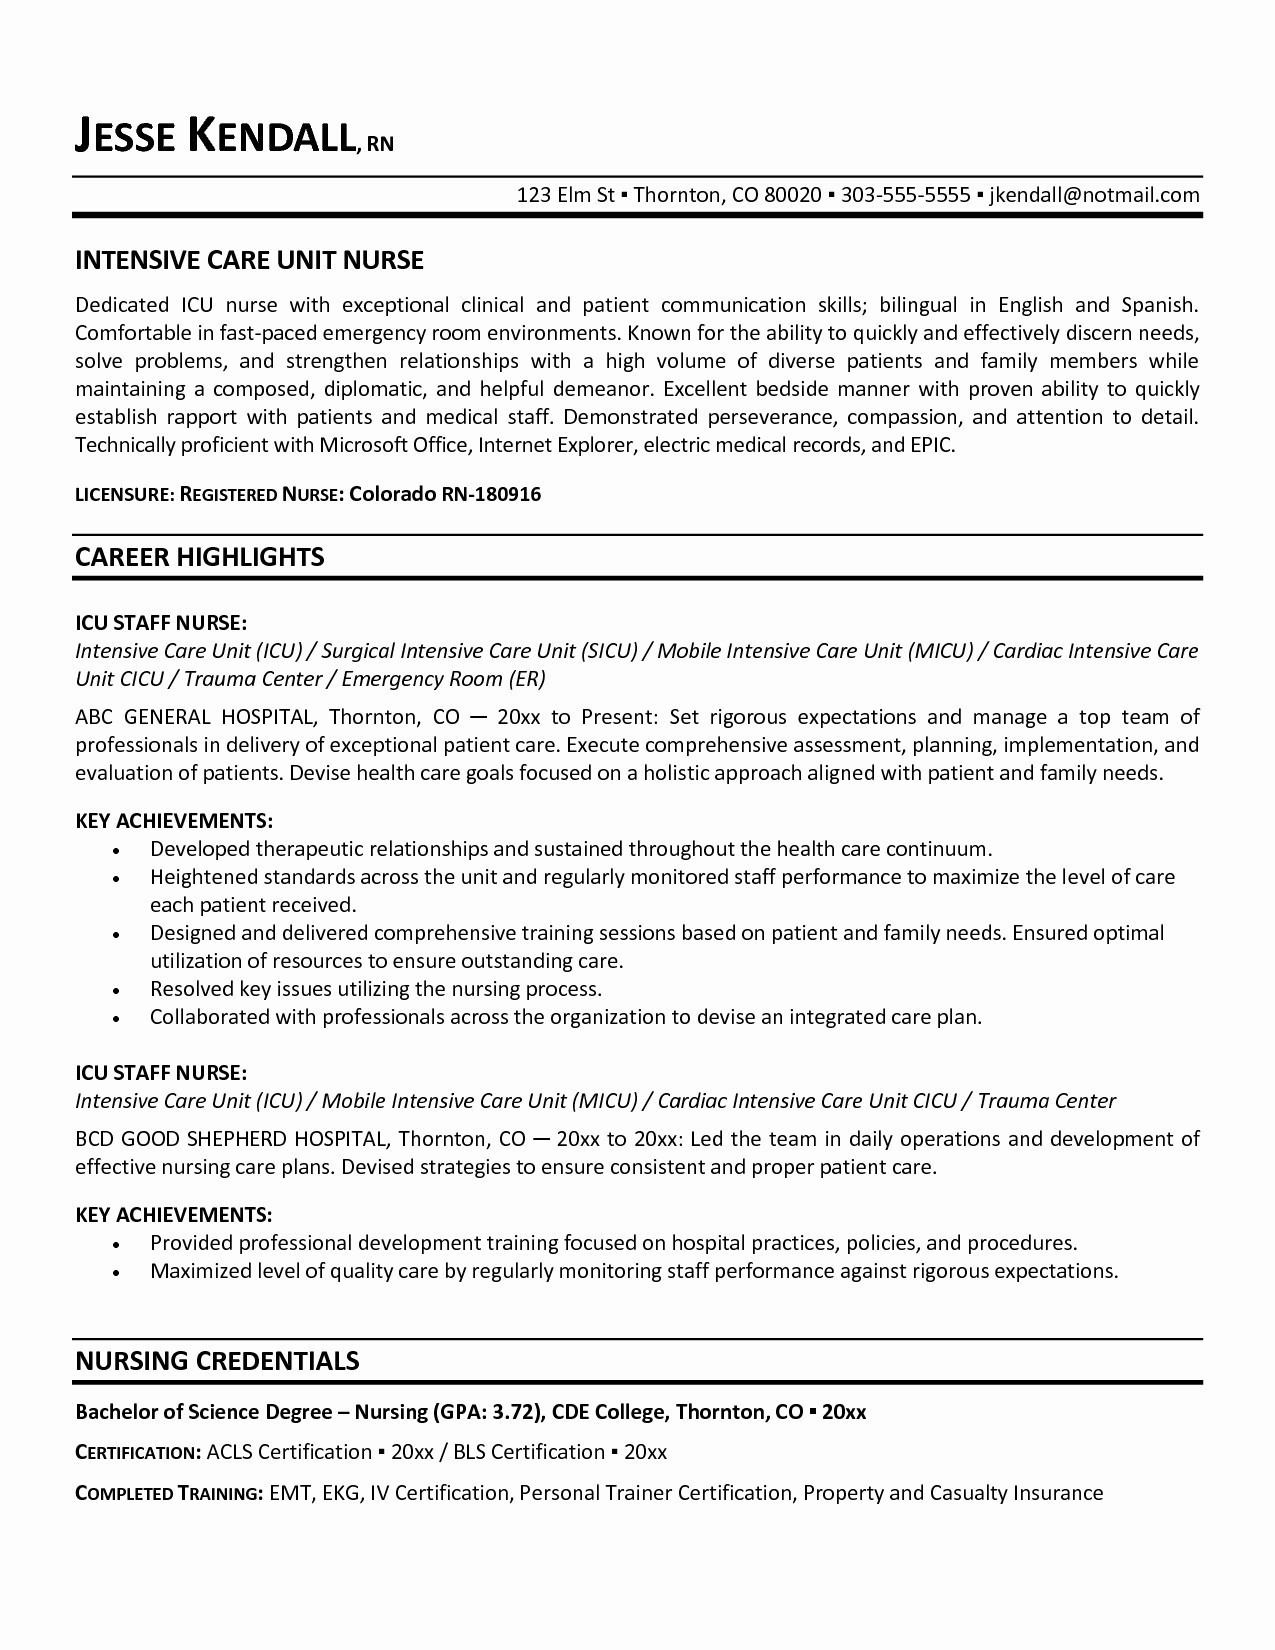 Rn Resume Examples Examples Of Rn Resumes New Rn Resume Examples Awesome Fresh Good Nursing Resume Elegant Nurse Of Examples Of Rn Resumes rn resume examples|wikiresume.com